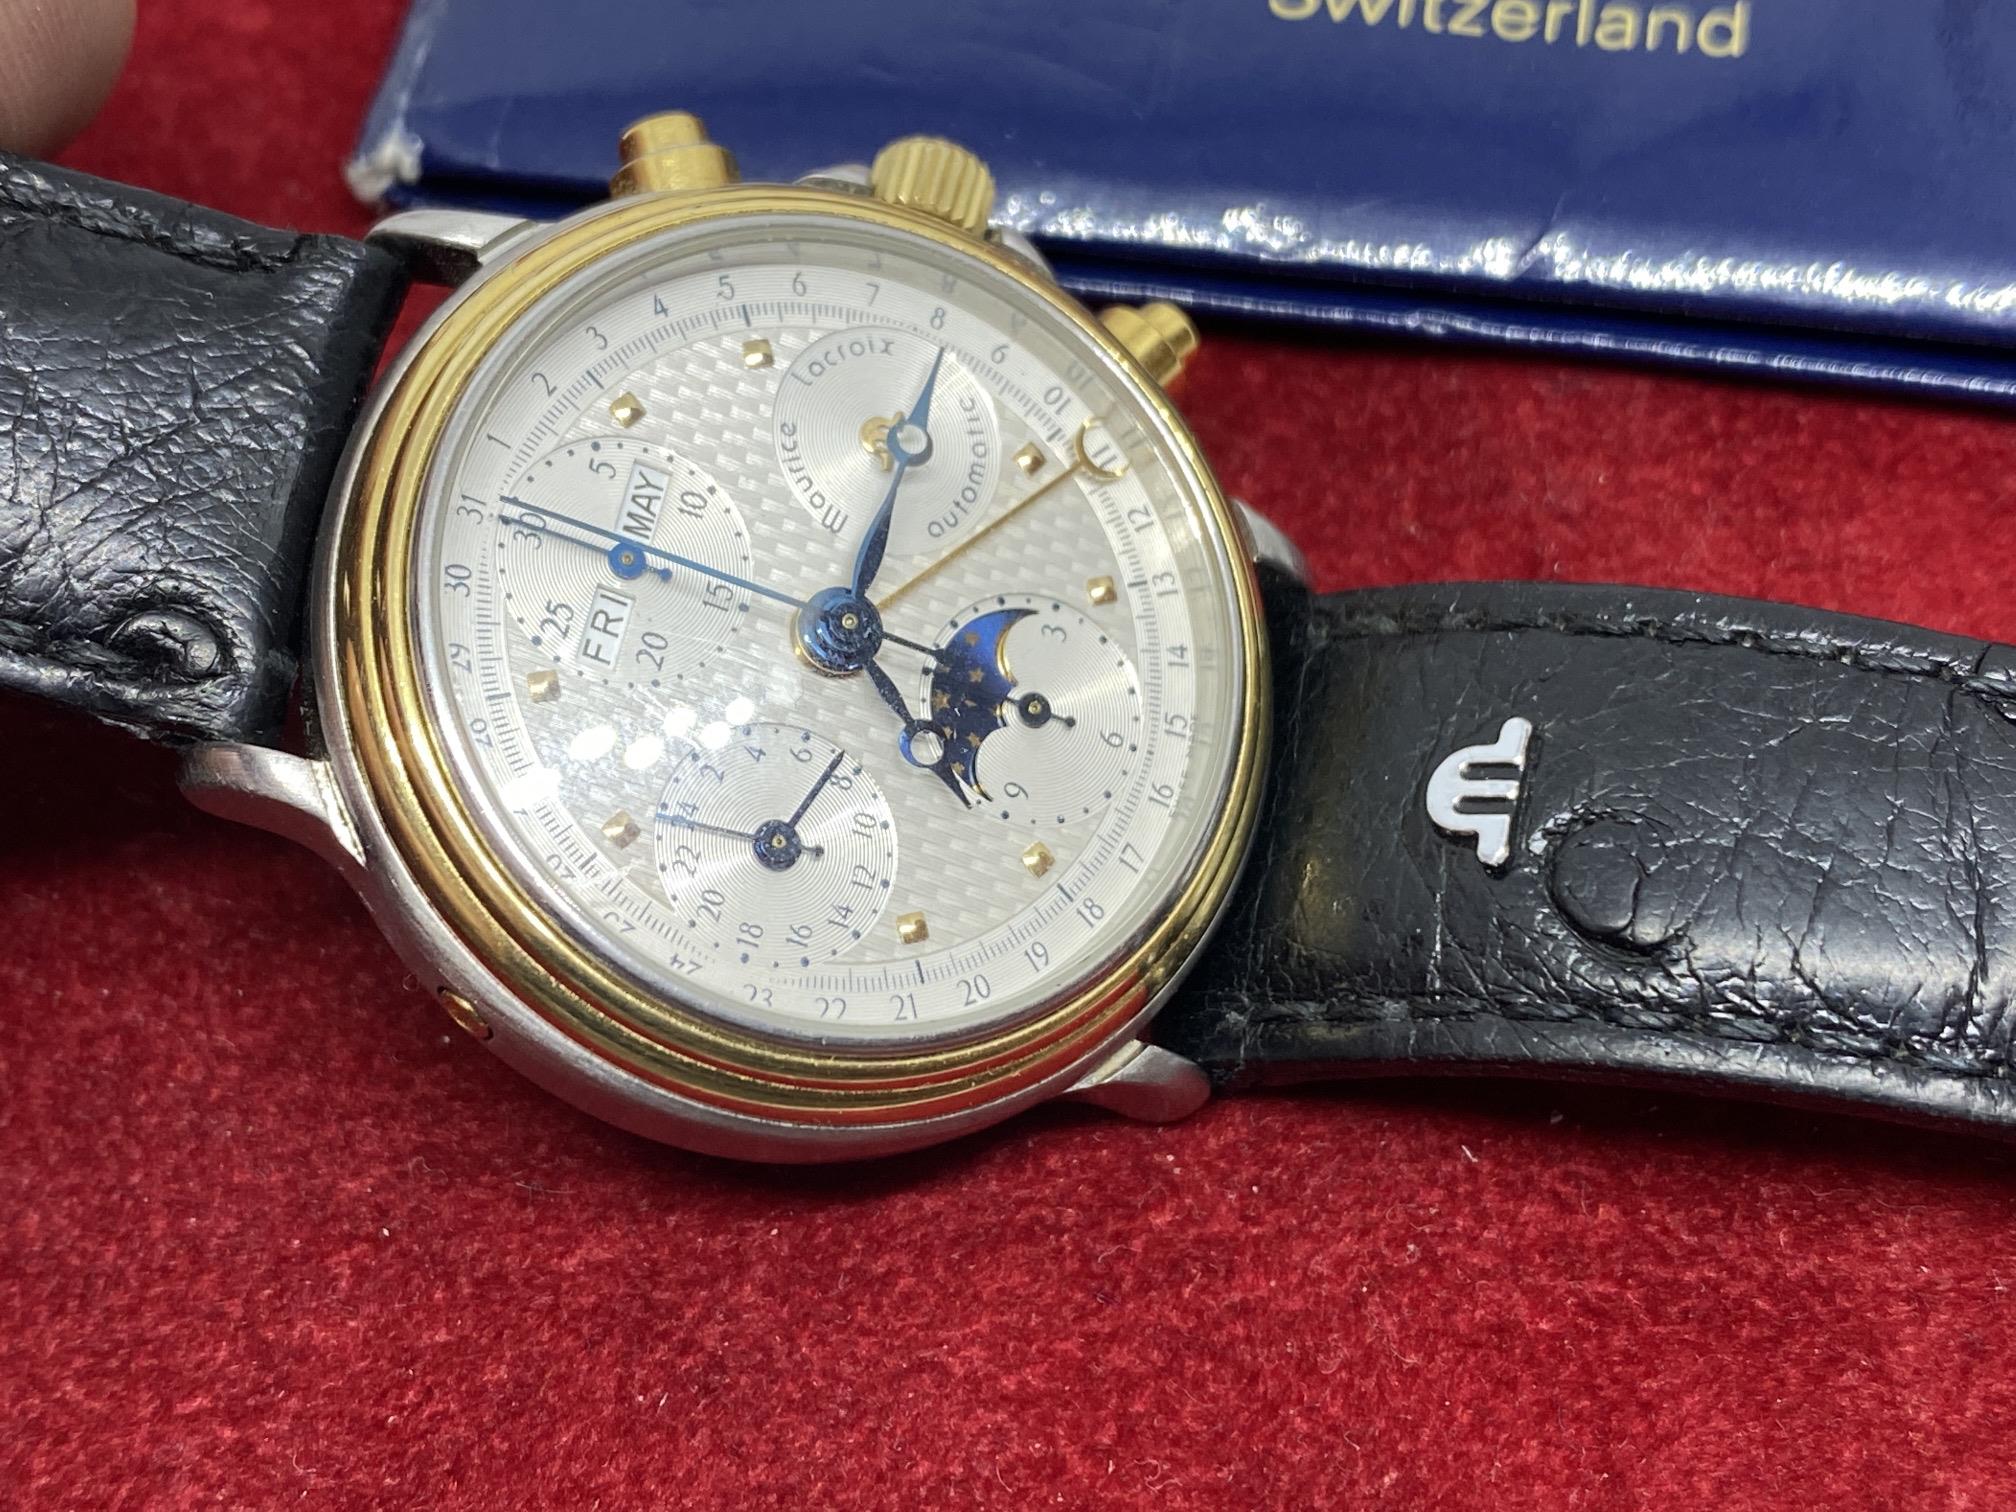 MAURICE LACROIX MOONPHASE, PERPETUAL CALENDAR WATCH WITH PAPERS - Image 5 of 8